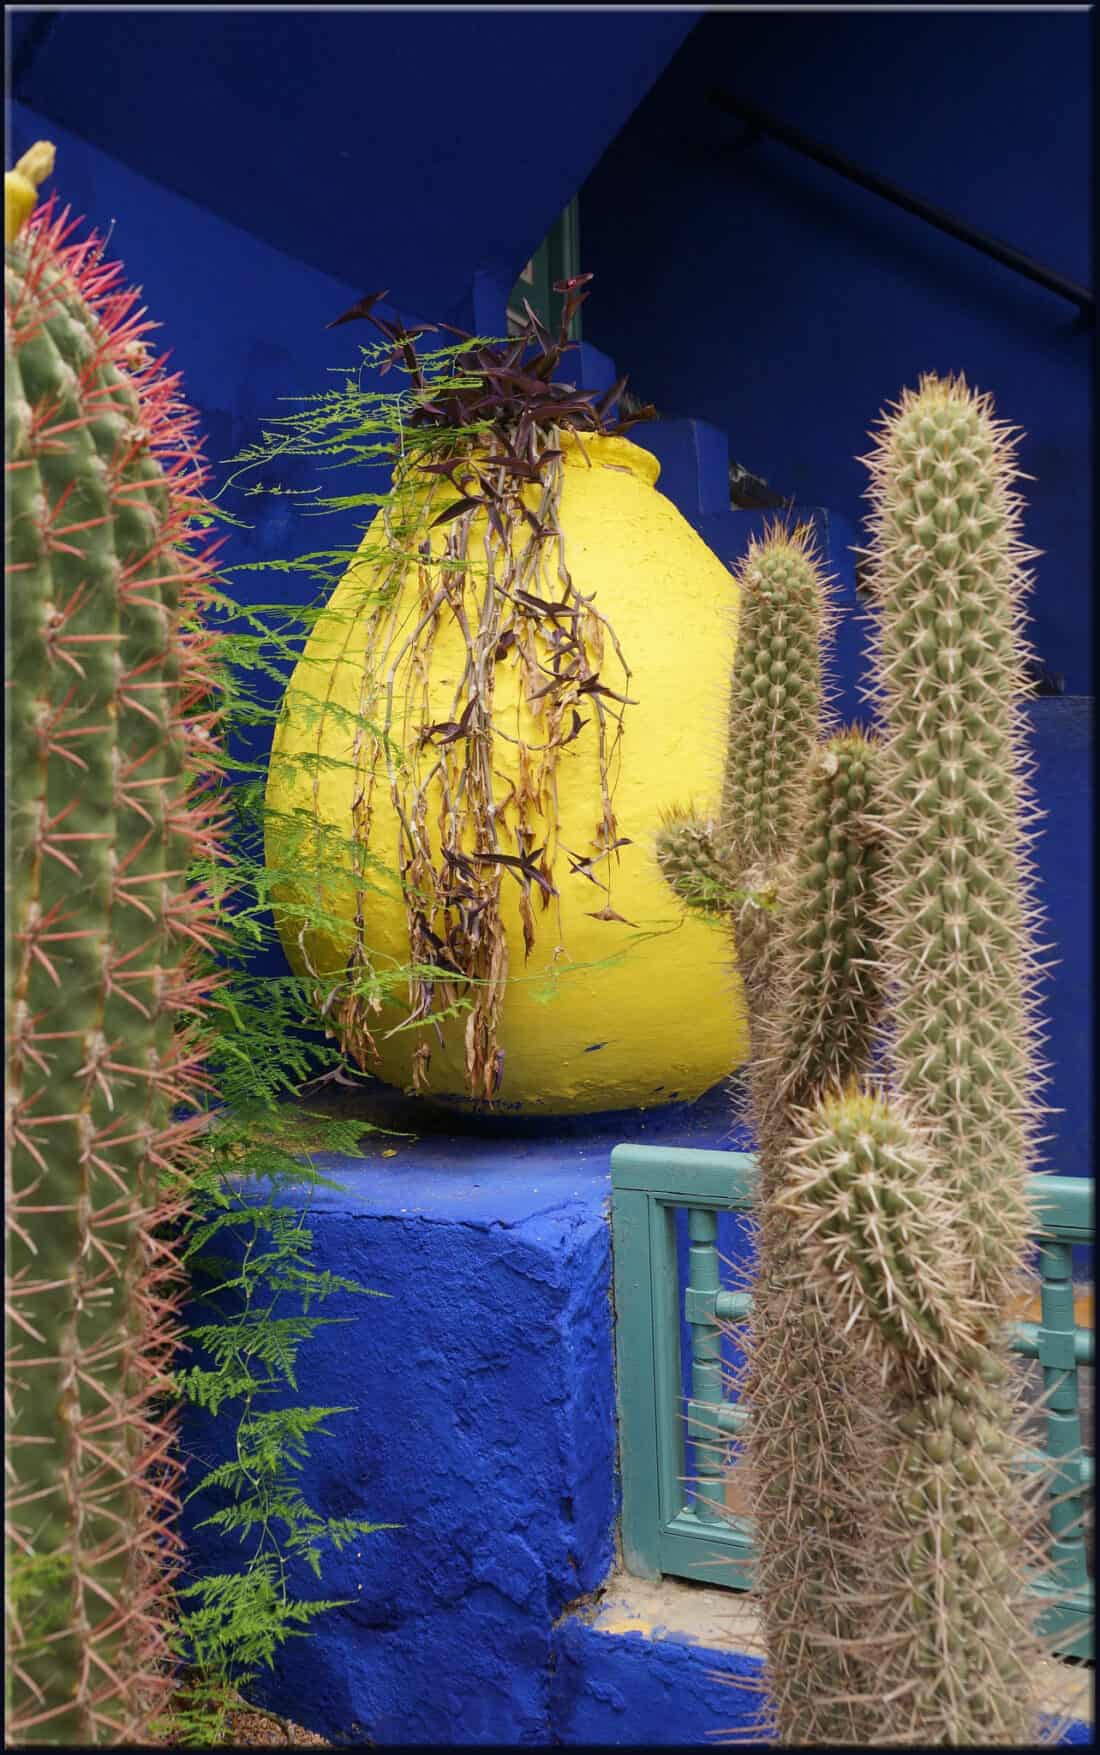 A vibrant yellow pot with a plant, surrounded by cacti against a Majorelle Garden blue backdrop.